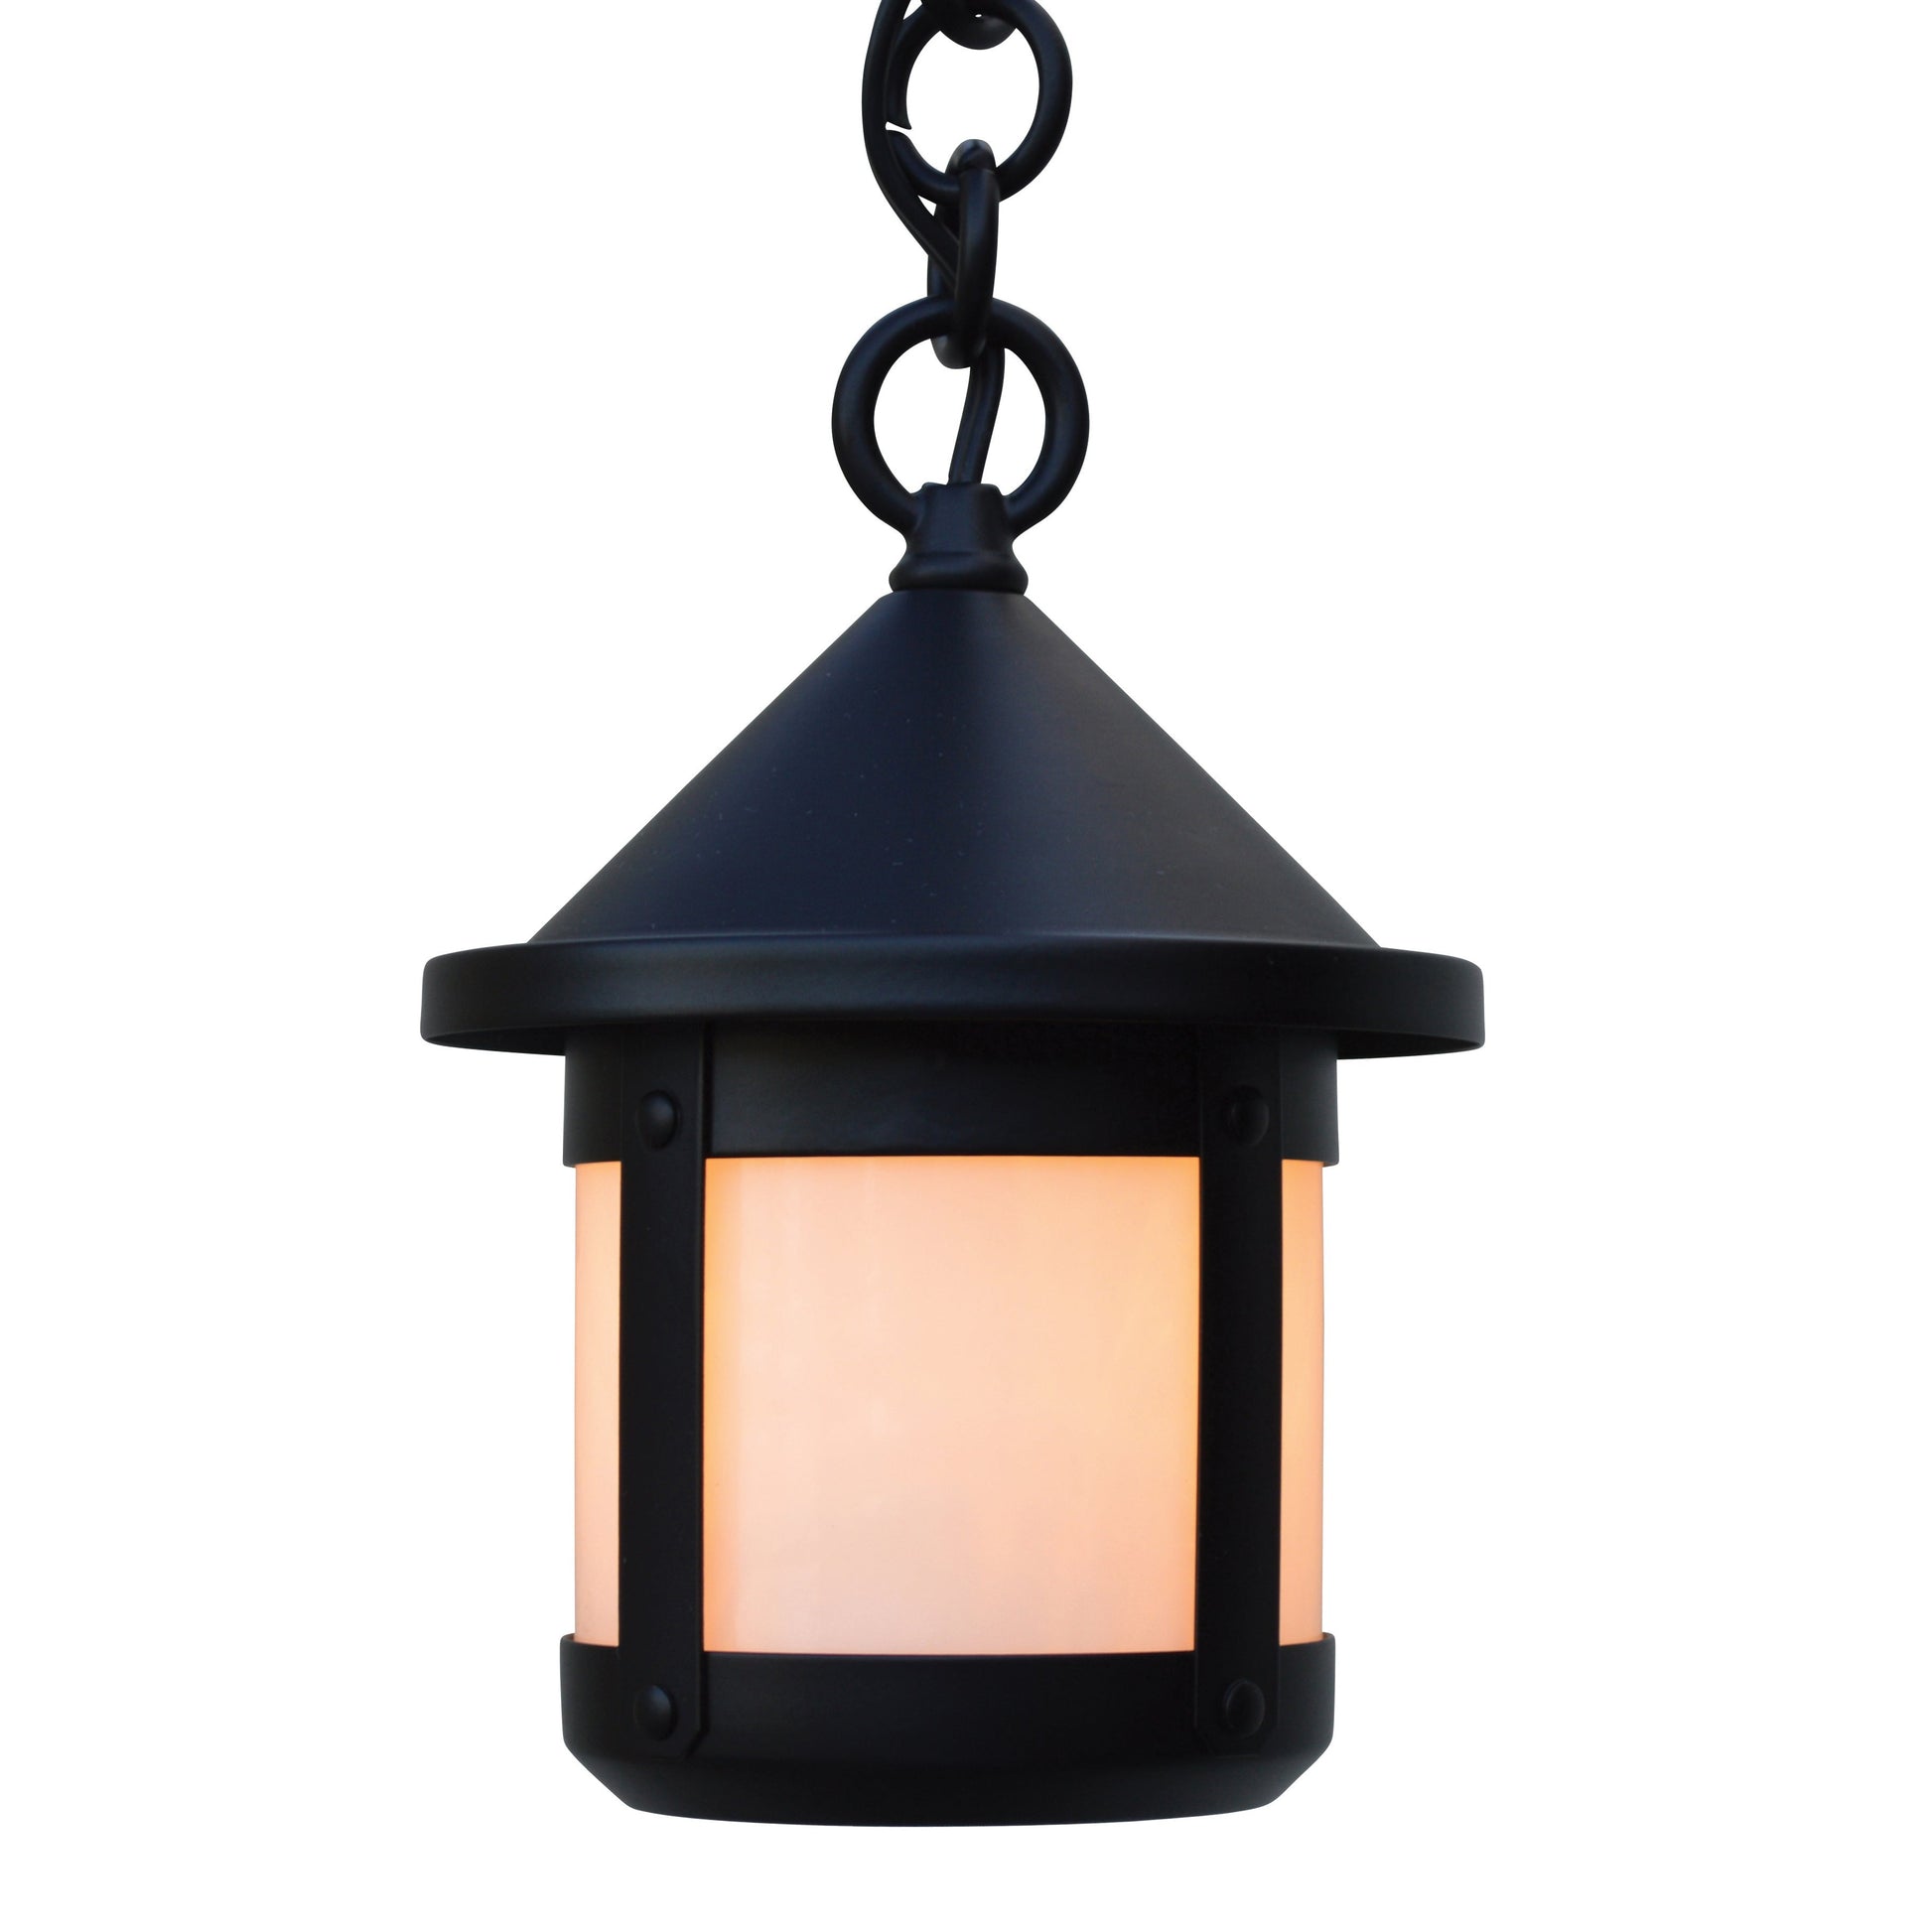 Arroyo Craftsman Berkeley 6" Raw Copper Short Body Pendant With Off White Glass Shade